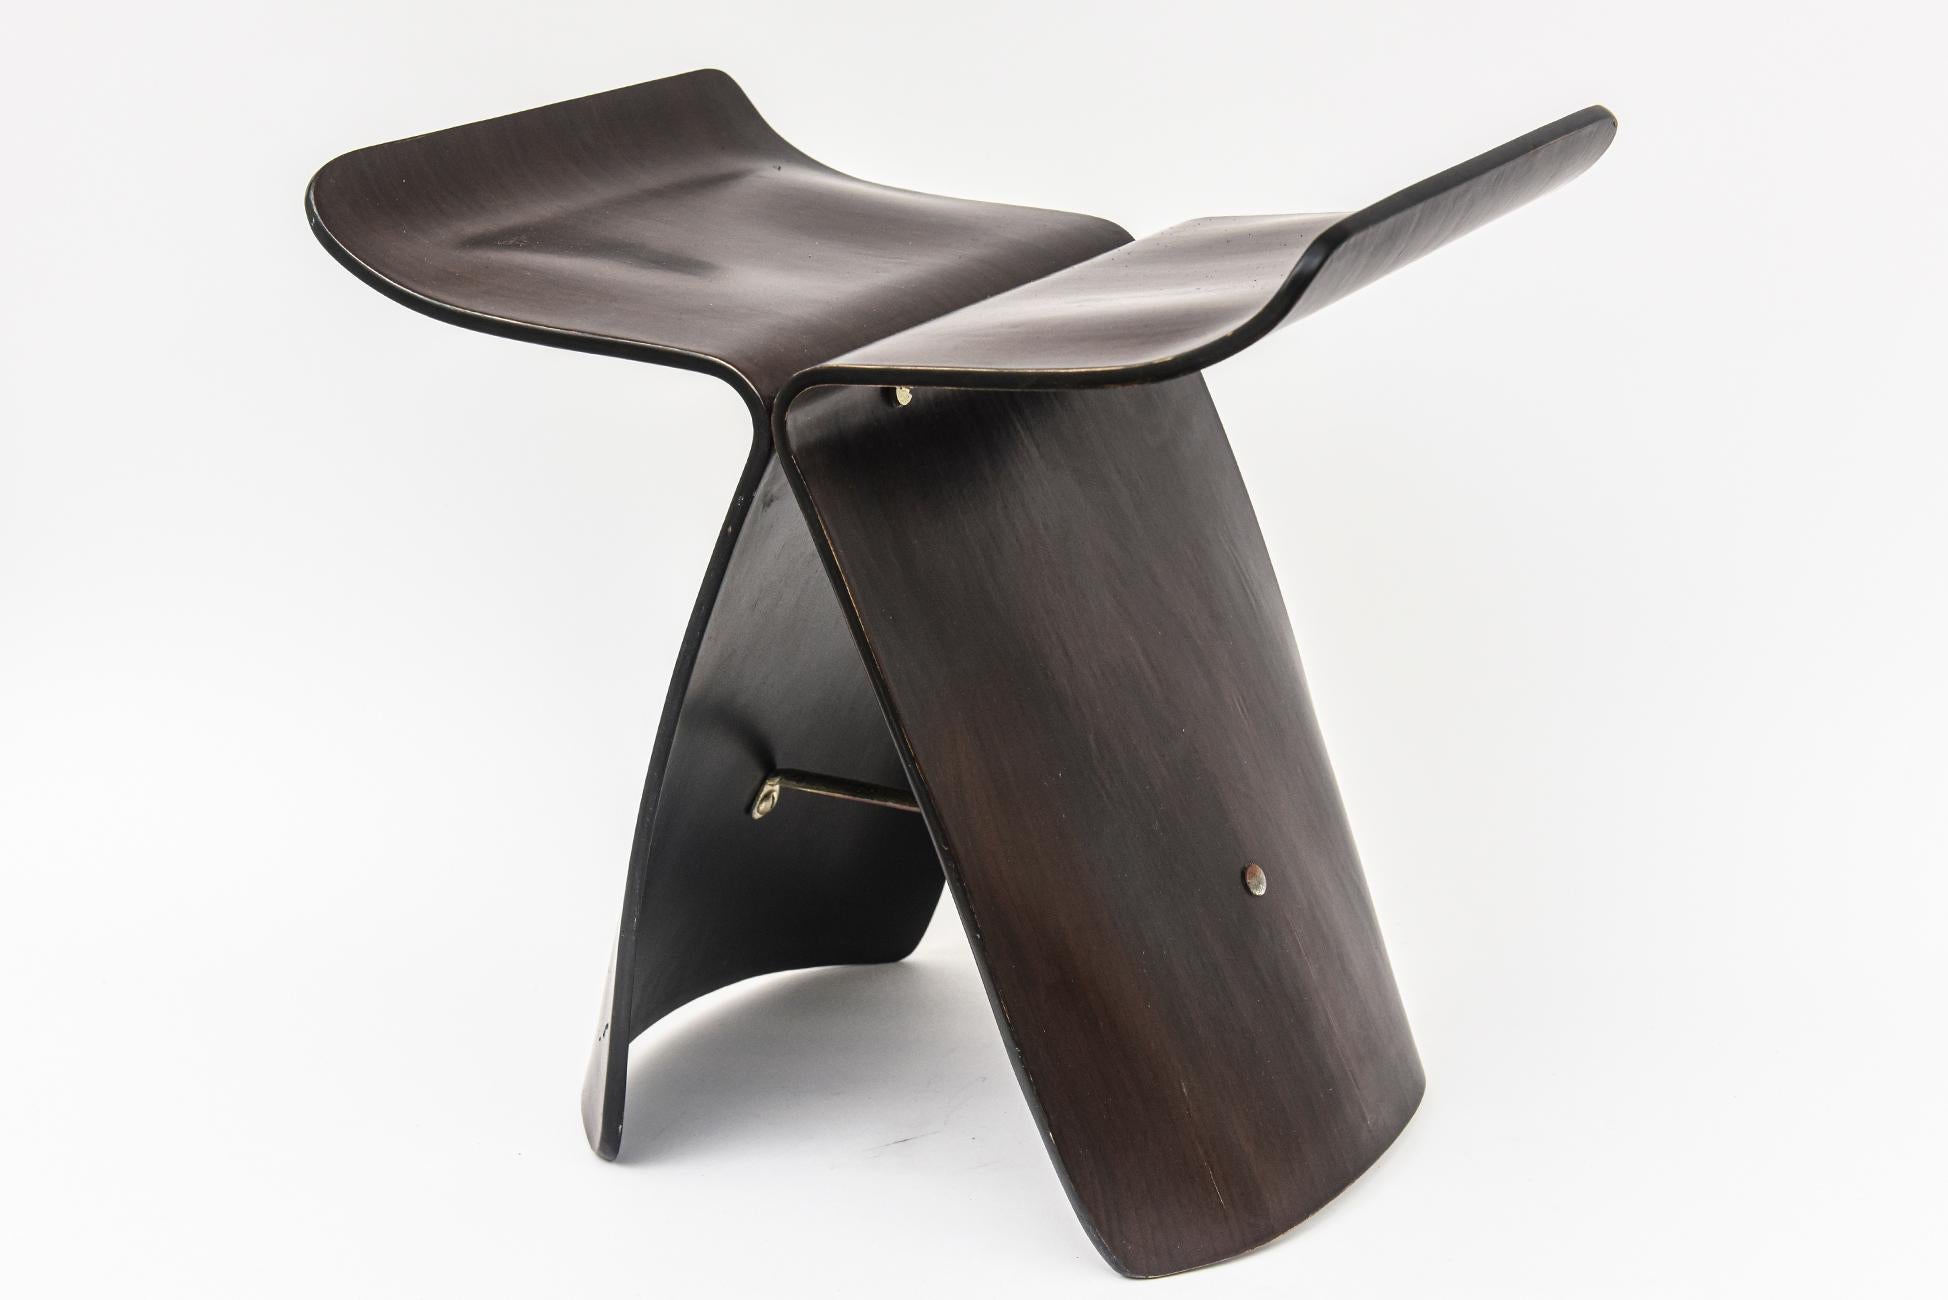 This iconic and collectable butterfly stool is a work of simple and elegant sculpture by the Japanese designer Sori Yanagi. It is rosewood and brass structure. The combination aesthetics of the yin and the yang of western function meet Asian simple